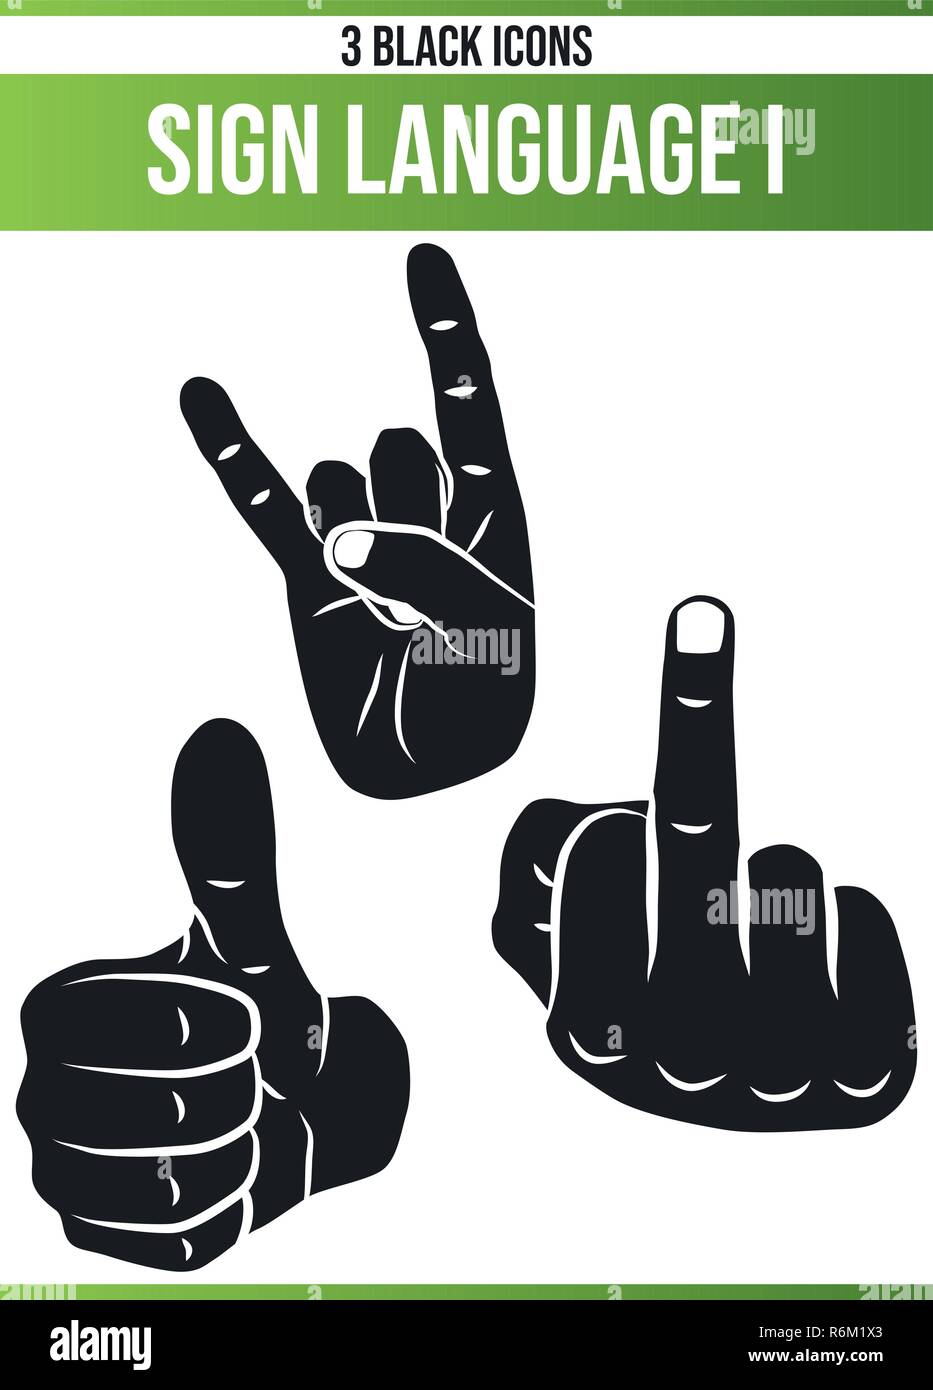 Black pictograms / icons on sign language. This icon set is perfect for creative people and designers who need the theme of hands in their graphic des Stock Vector